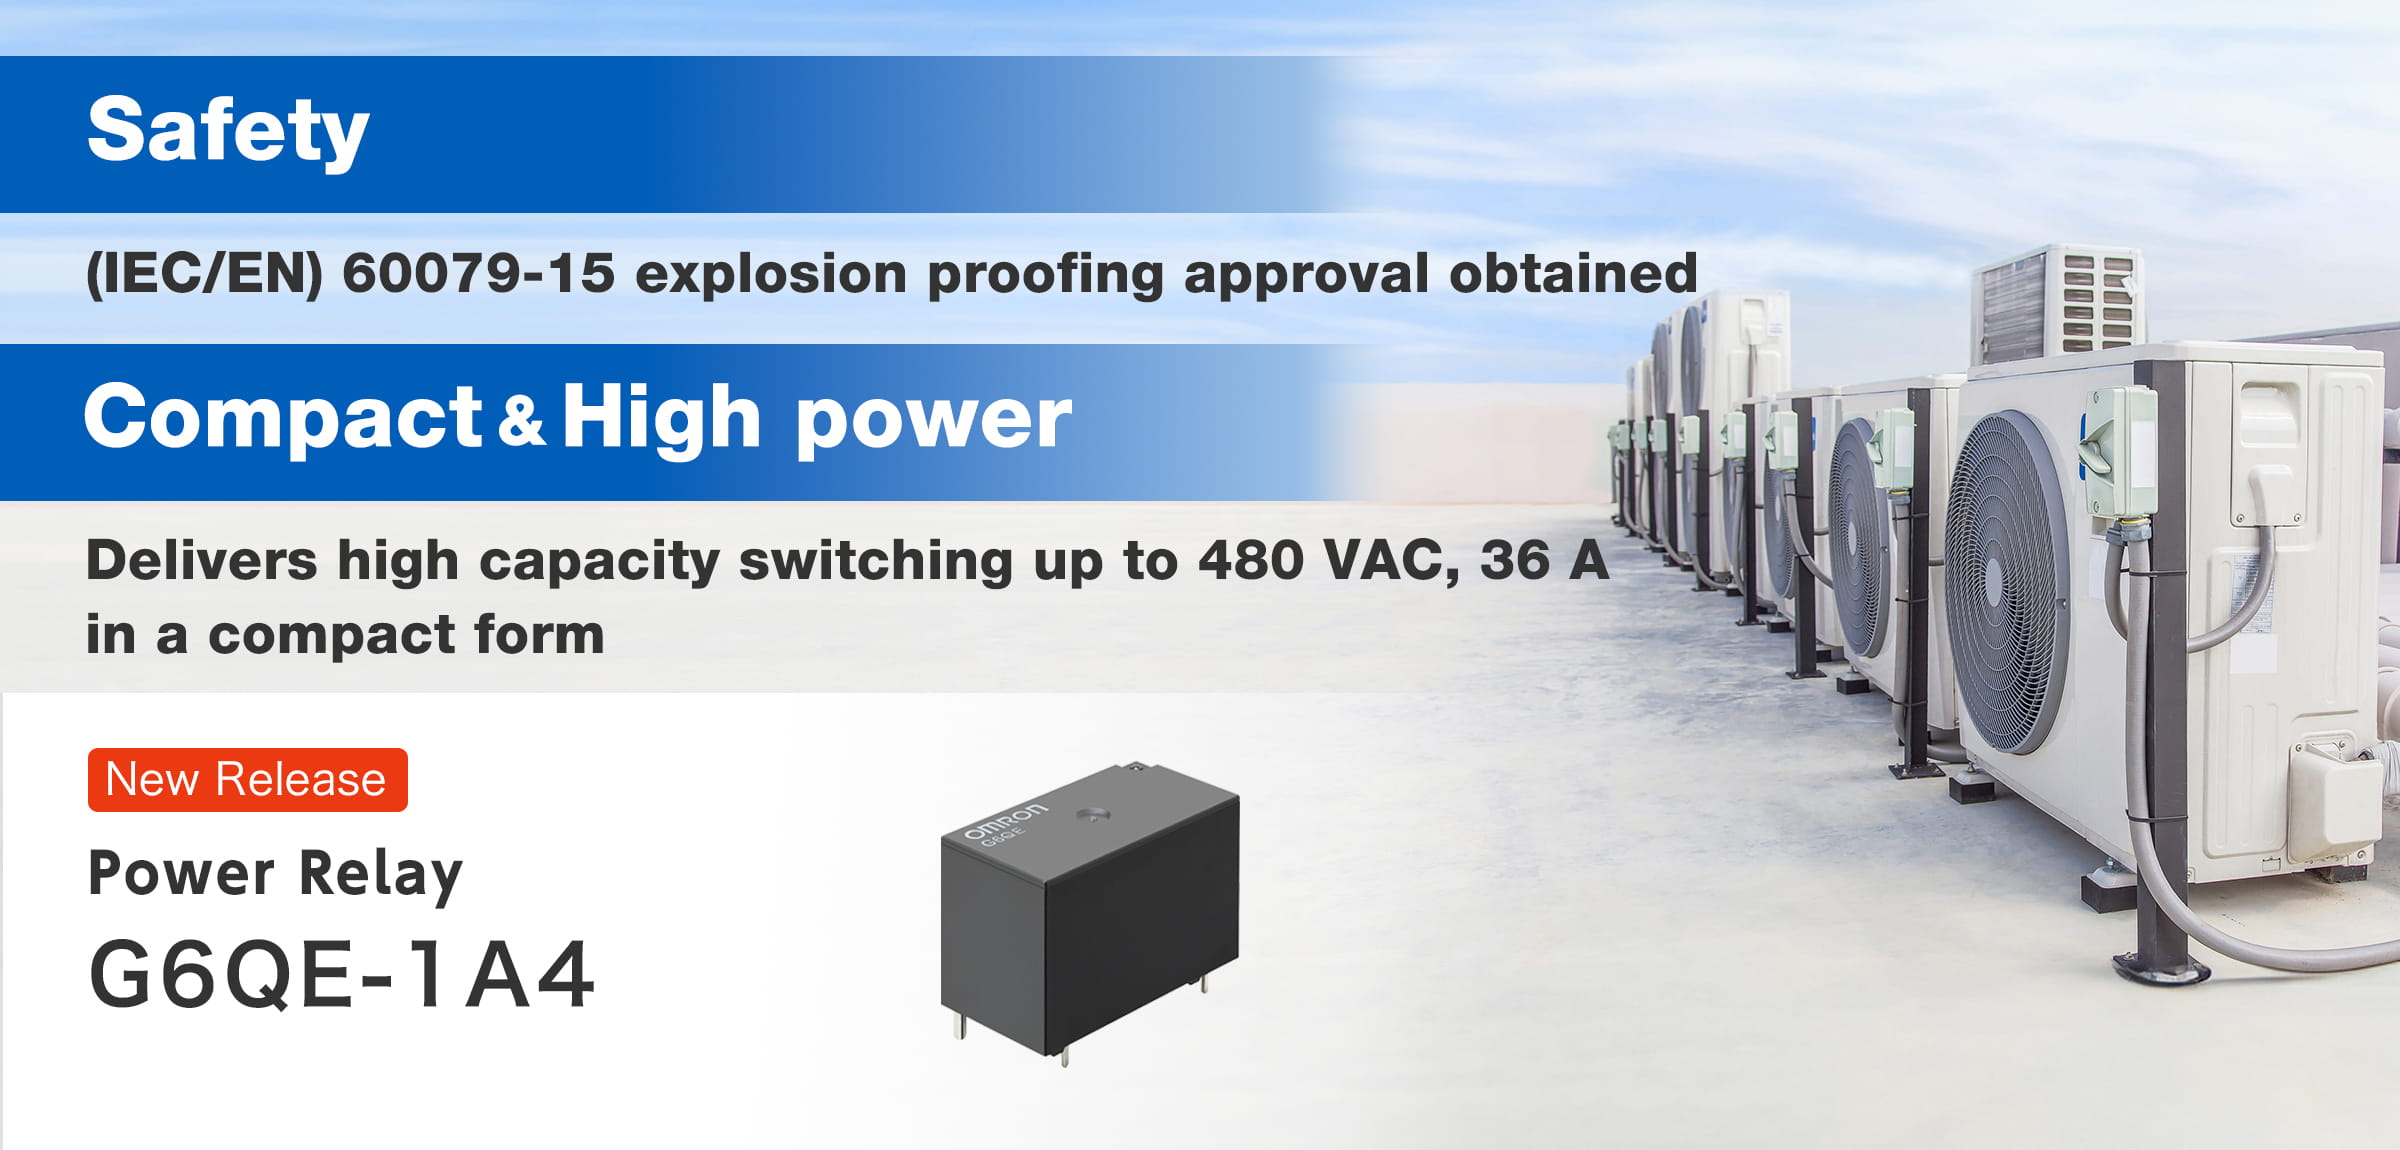 【Safety】(IEC/EN) 60079-15 explosion proofing approval obtained【Compact＆High power】Delivers high capacity switching up to 480 VAC, 36 A in a compact form. NEW Power Relay G6QE-1A4